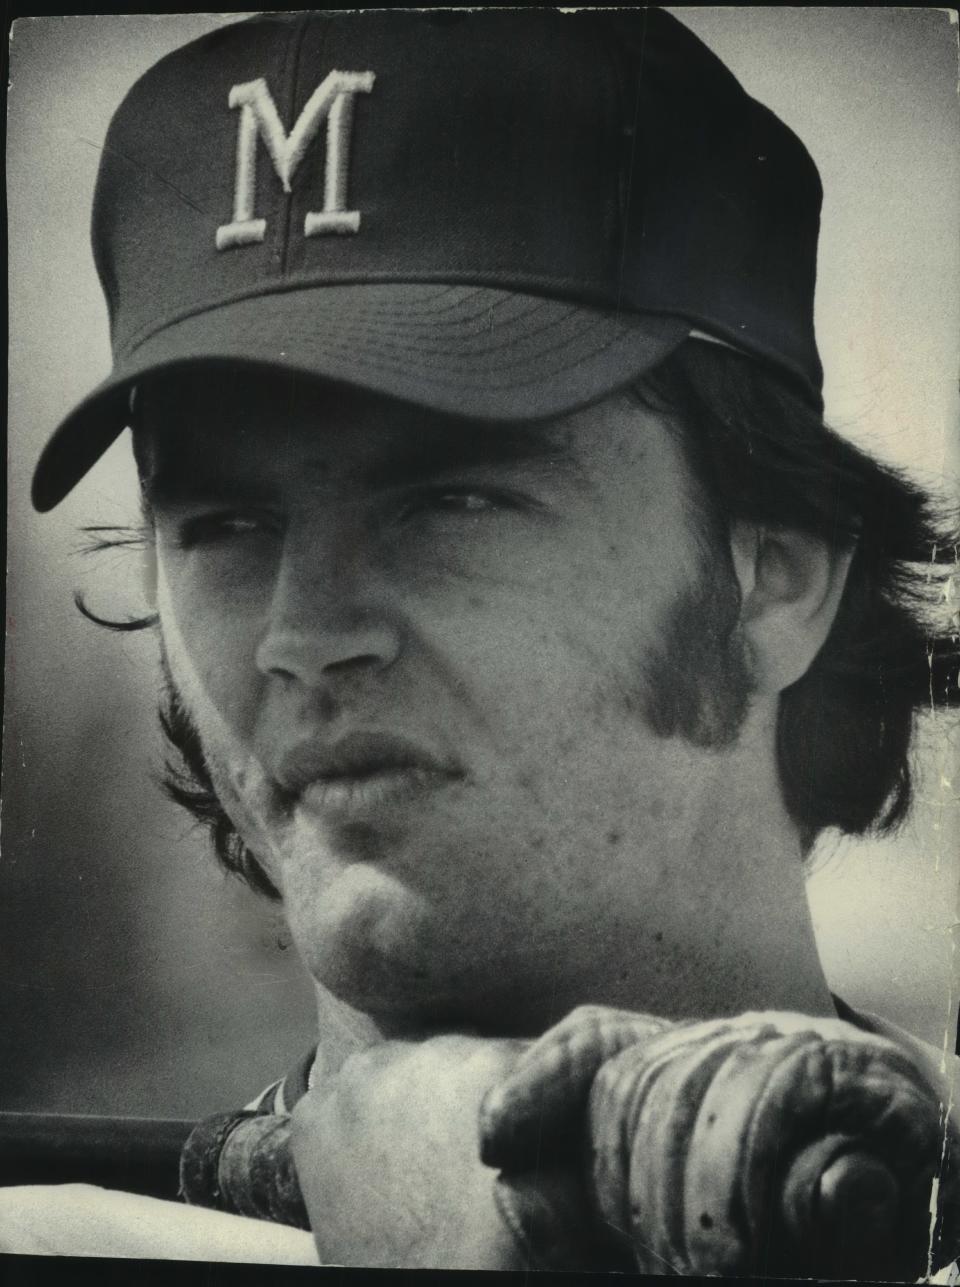 Rookie Gorman Thomas wore a determined look while he waited for his turn to swing a bat in 1973.